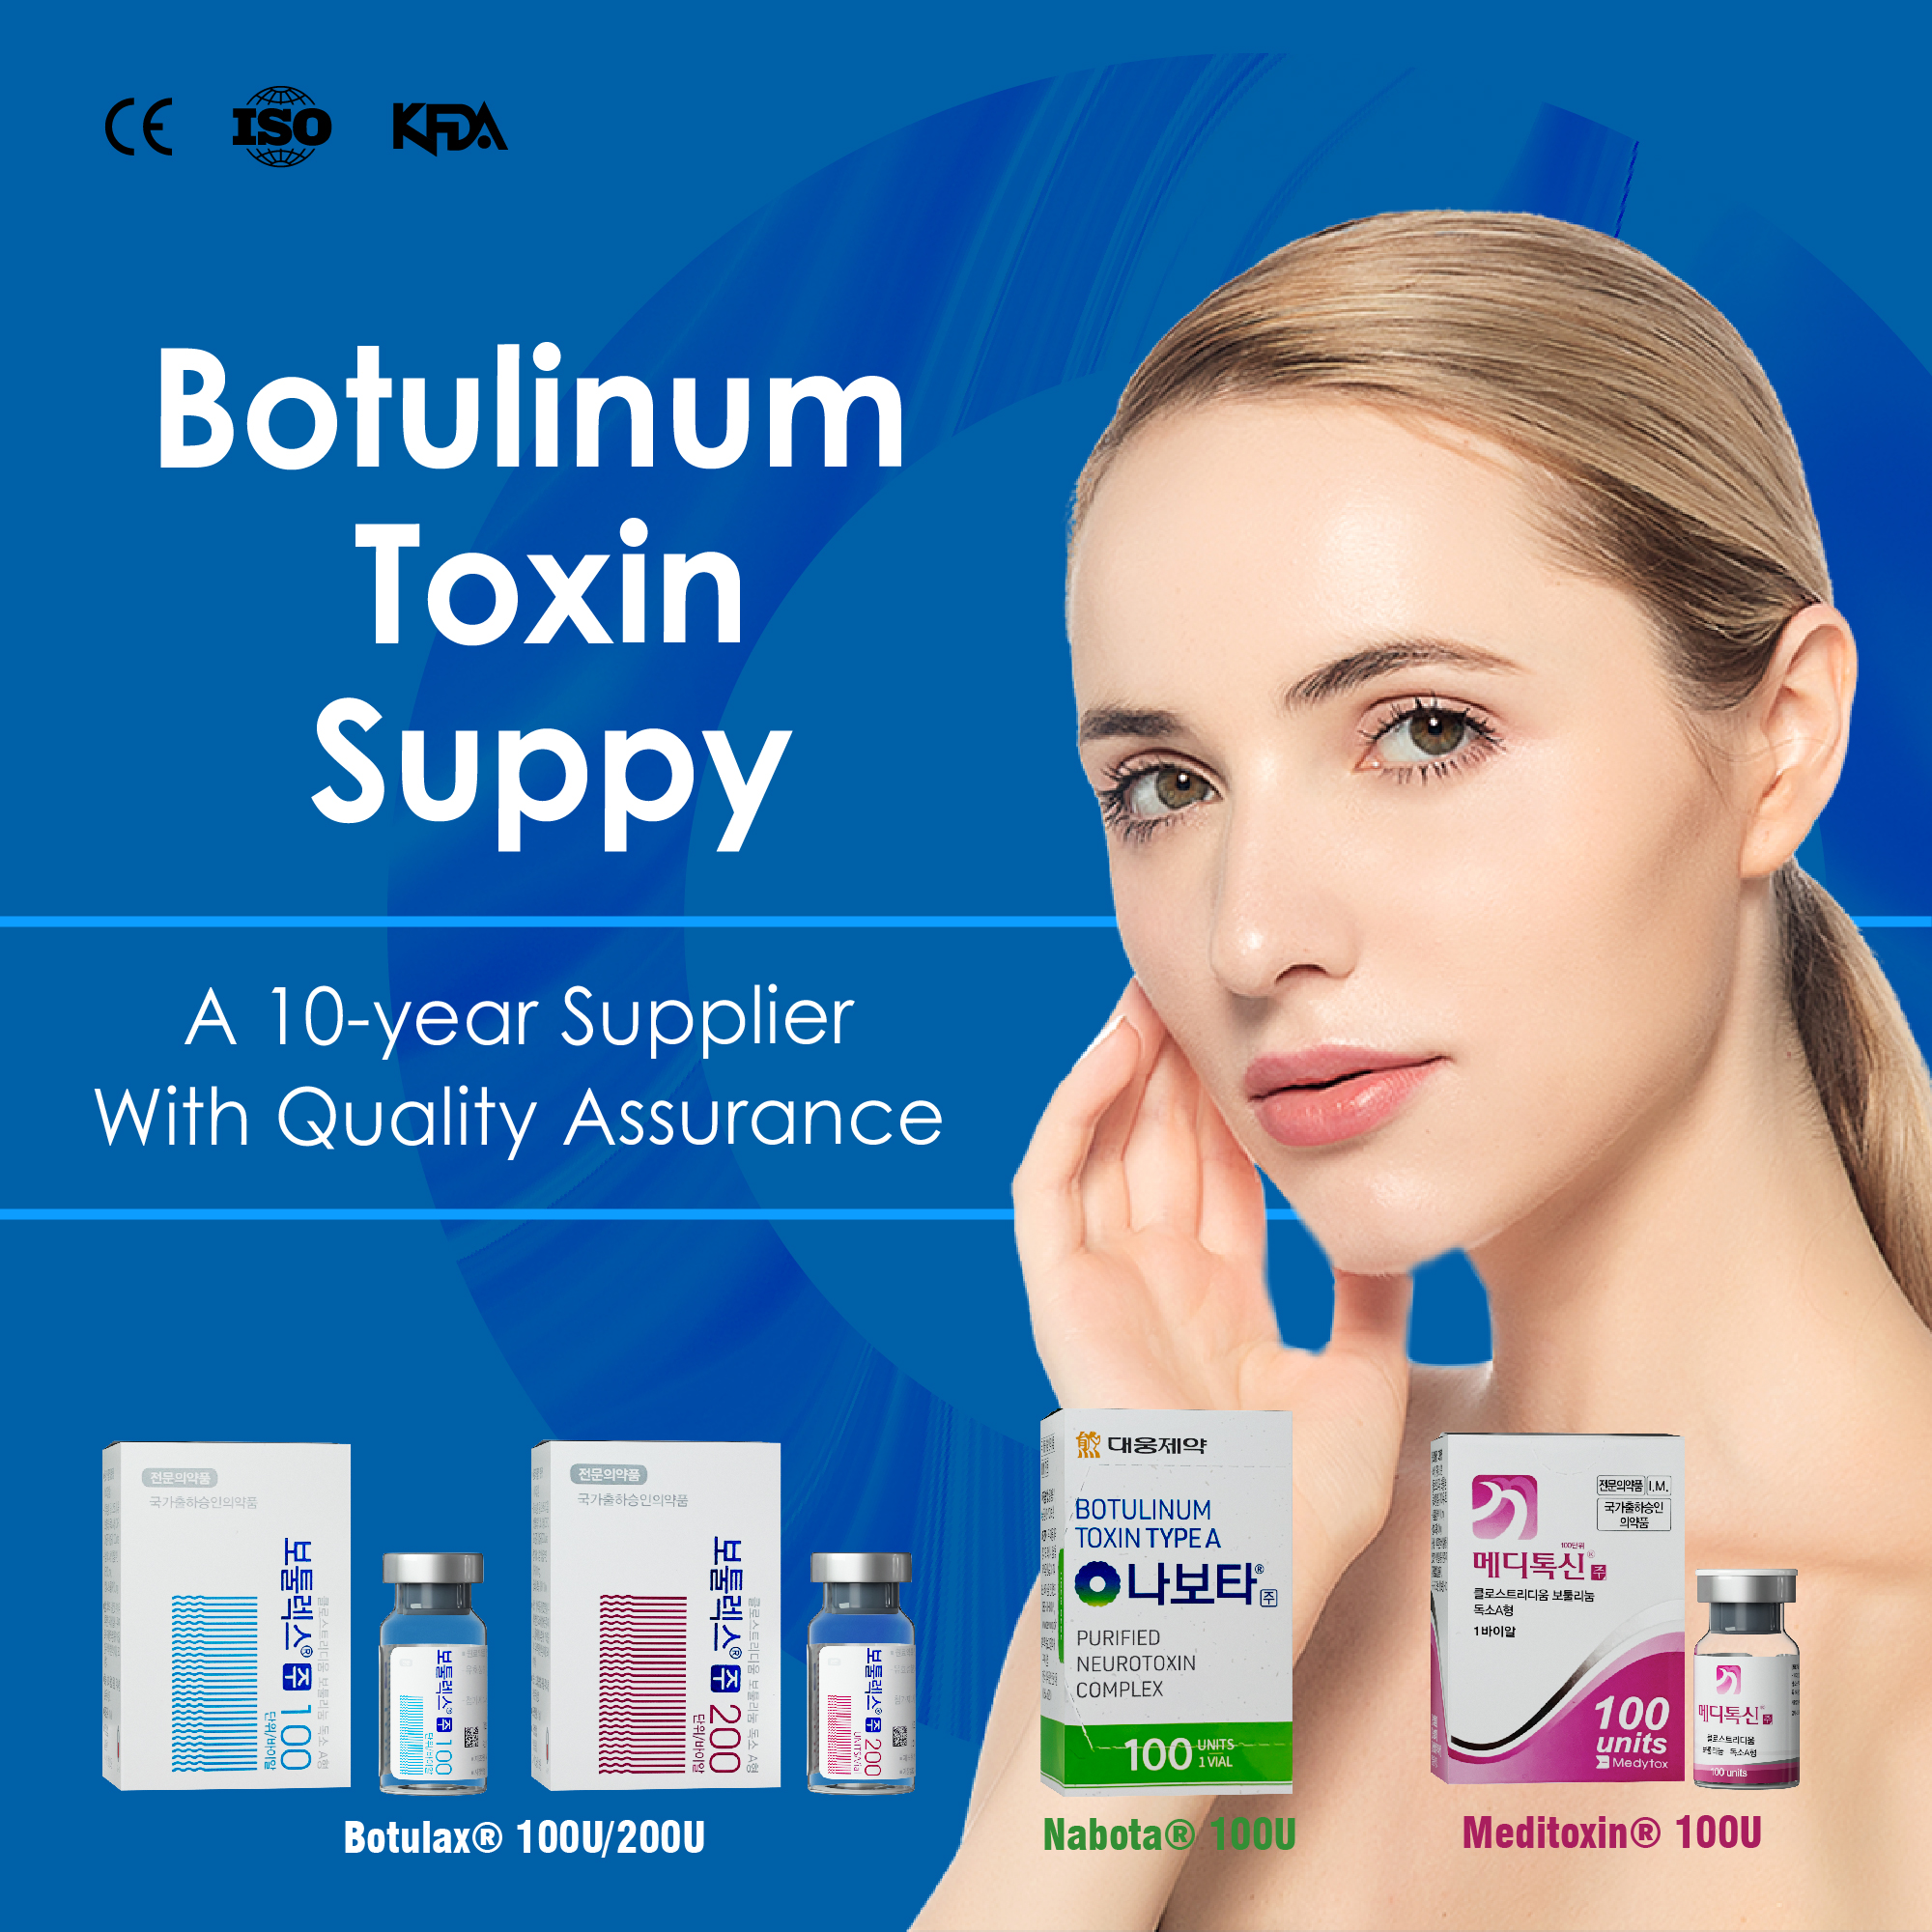 Where Can I Buy Botulinum Toxin in a Bottle? 